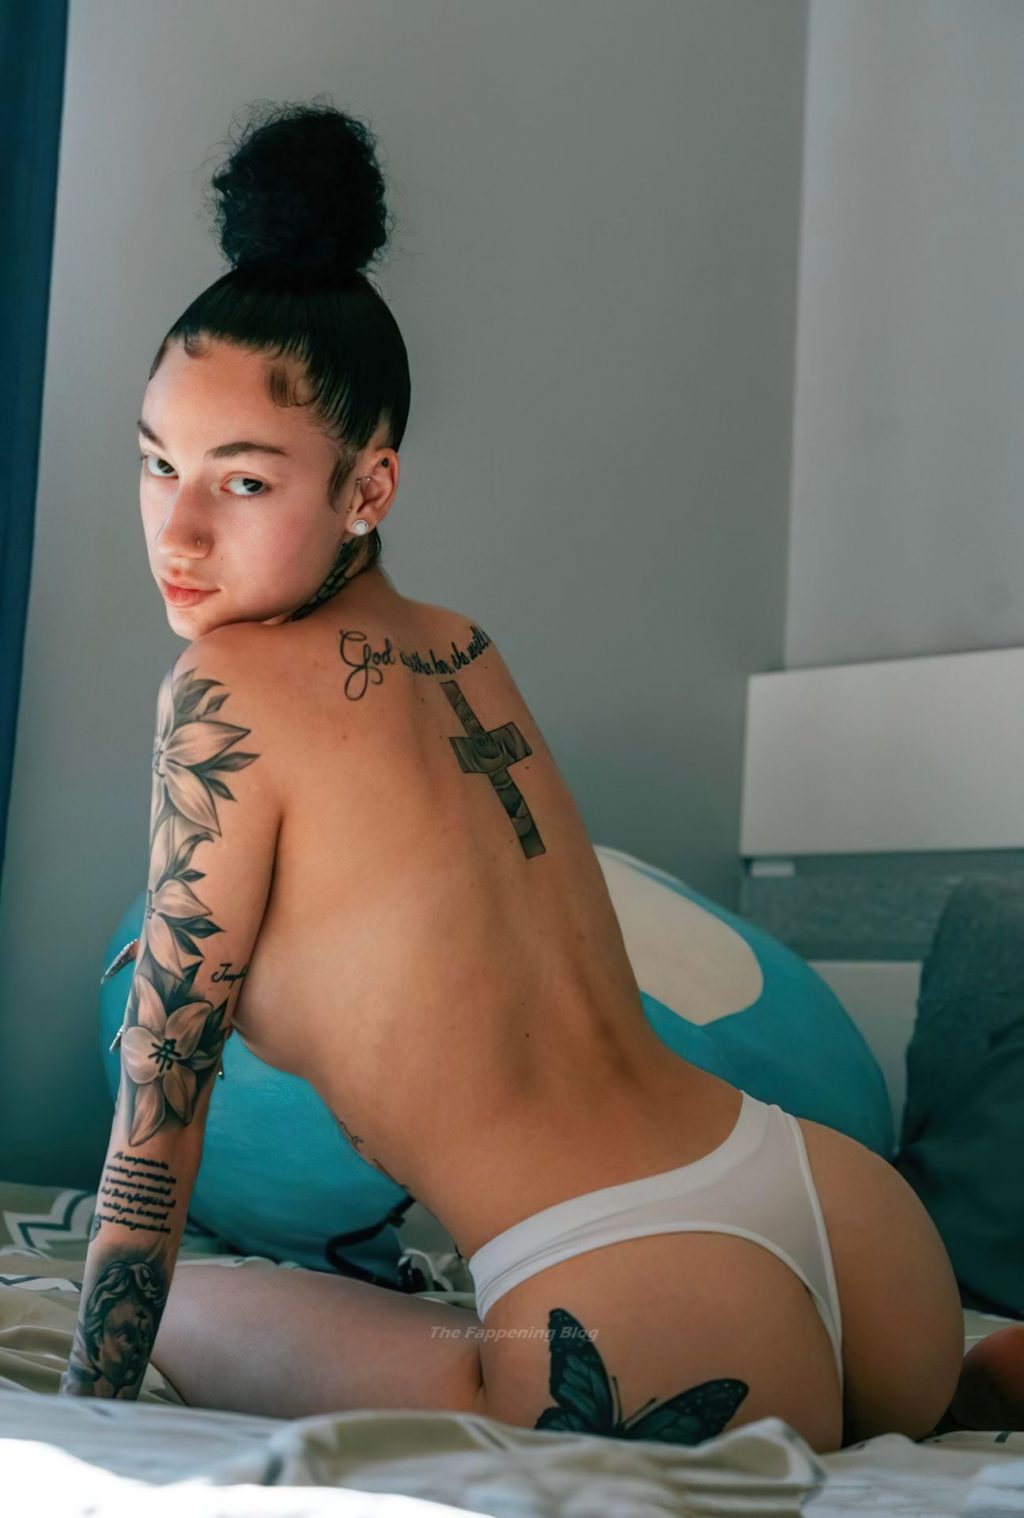 Bhabie naked pictures bhad Bhad Bhabie